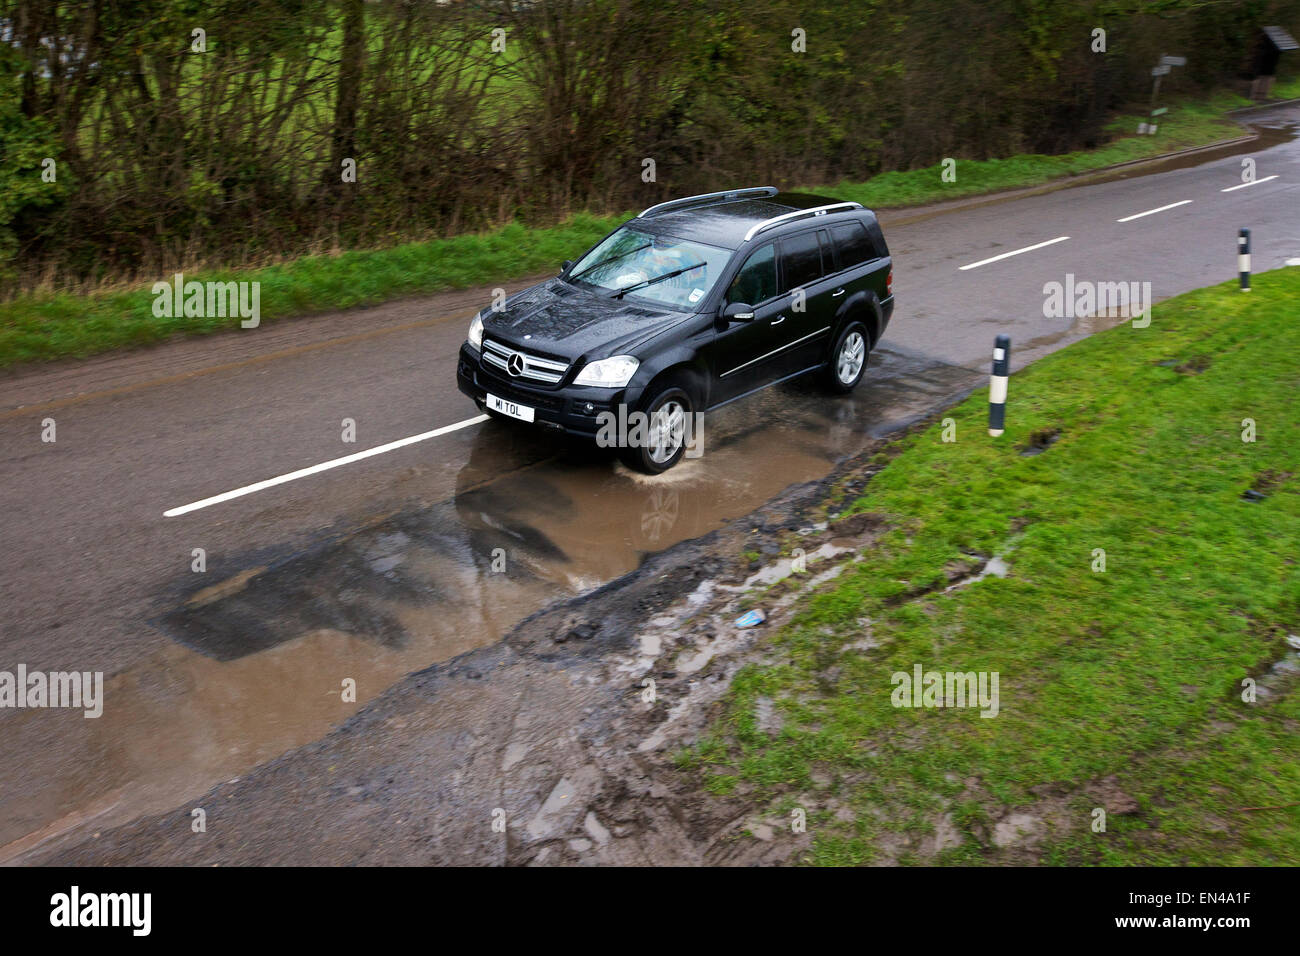 A 4X4 driving over Flooded Potholes in Rural England UK Stock Photo